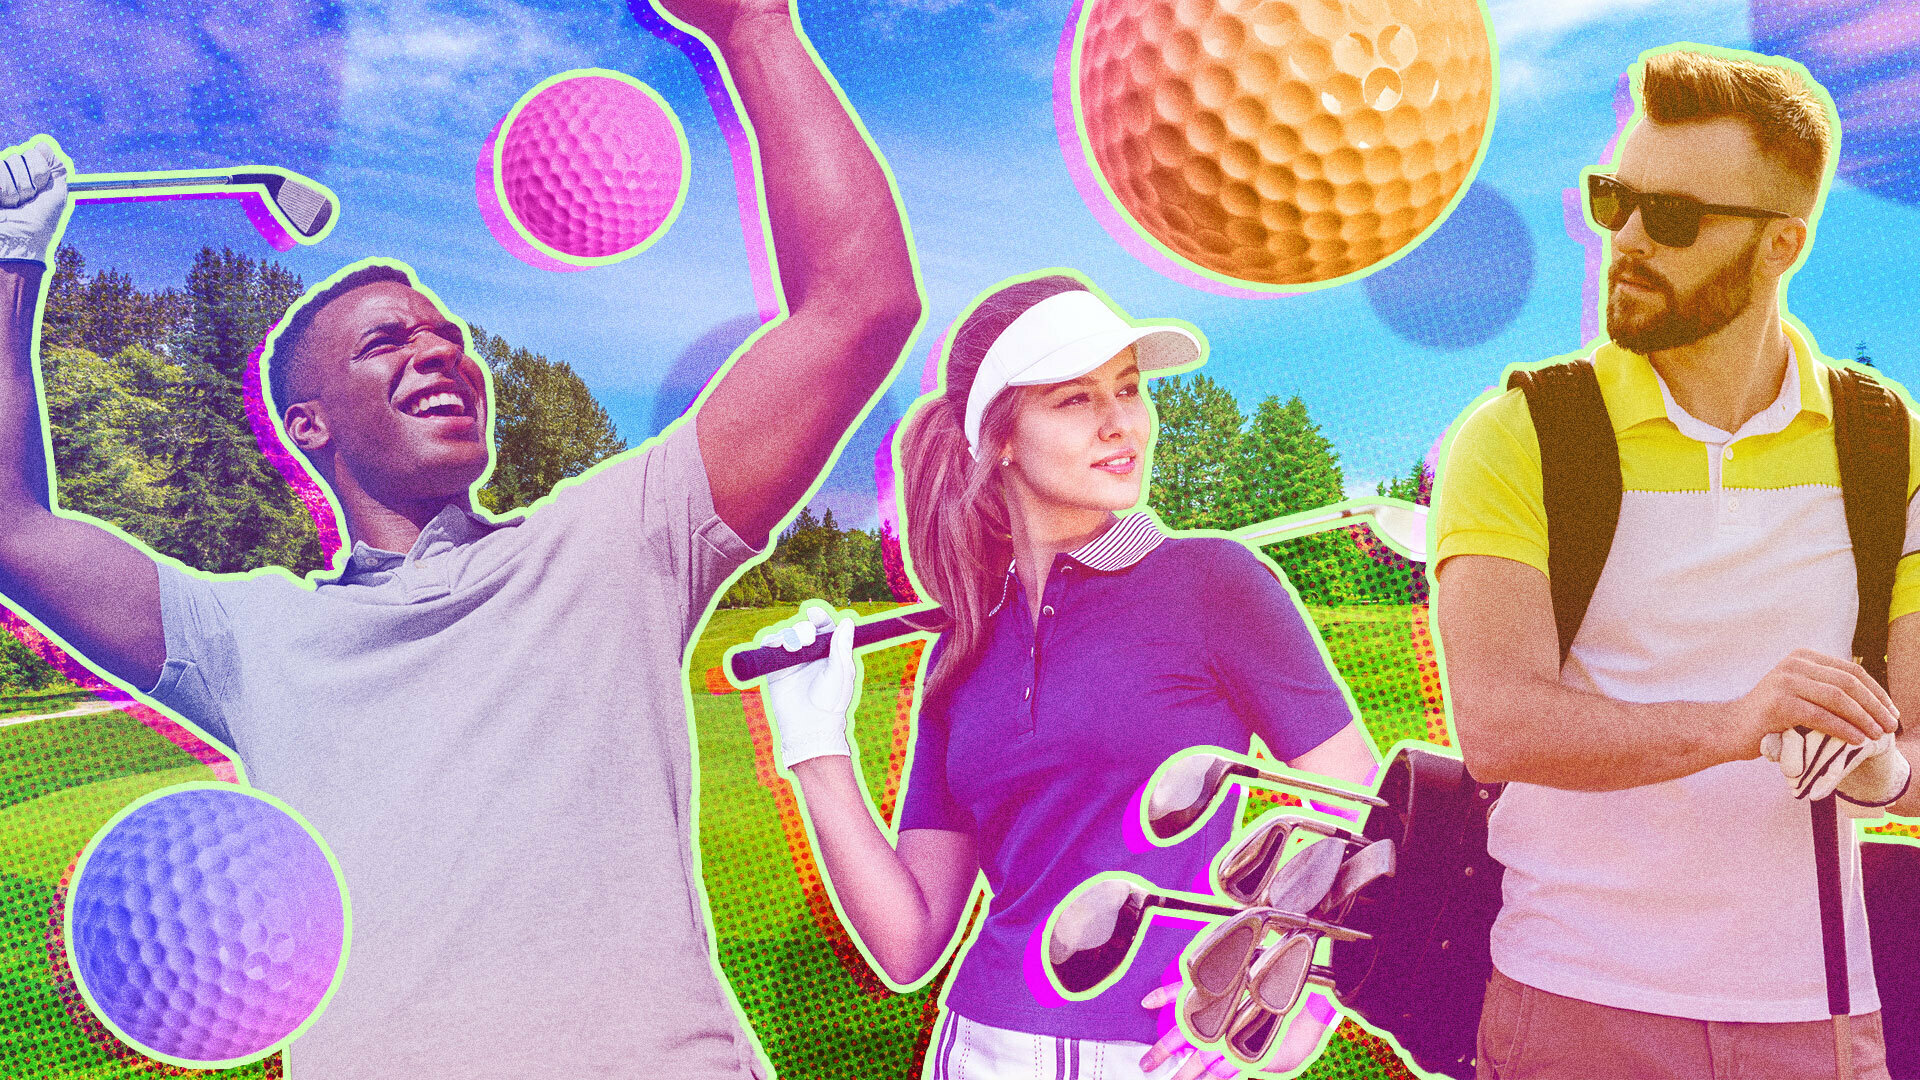 A colorful photo composite of people playing golf